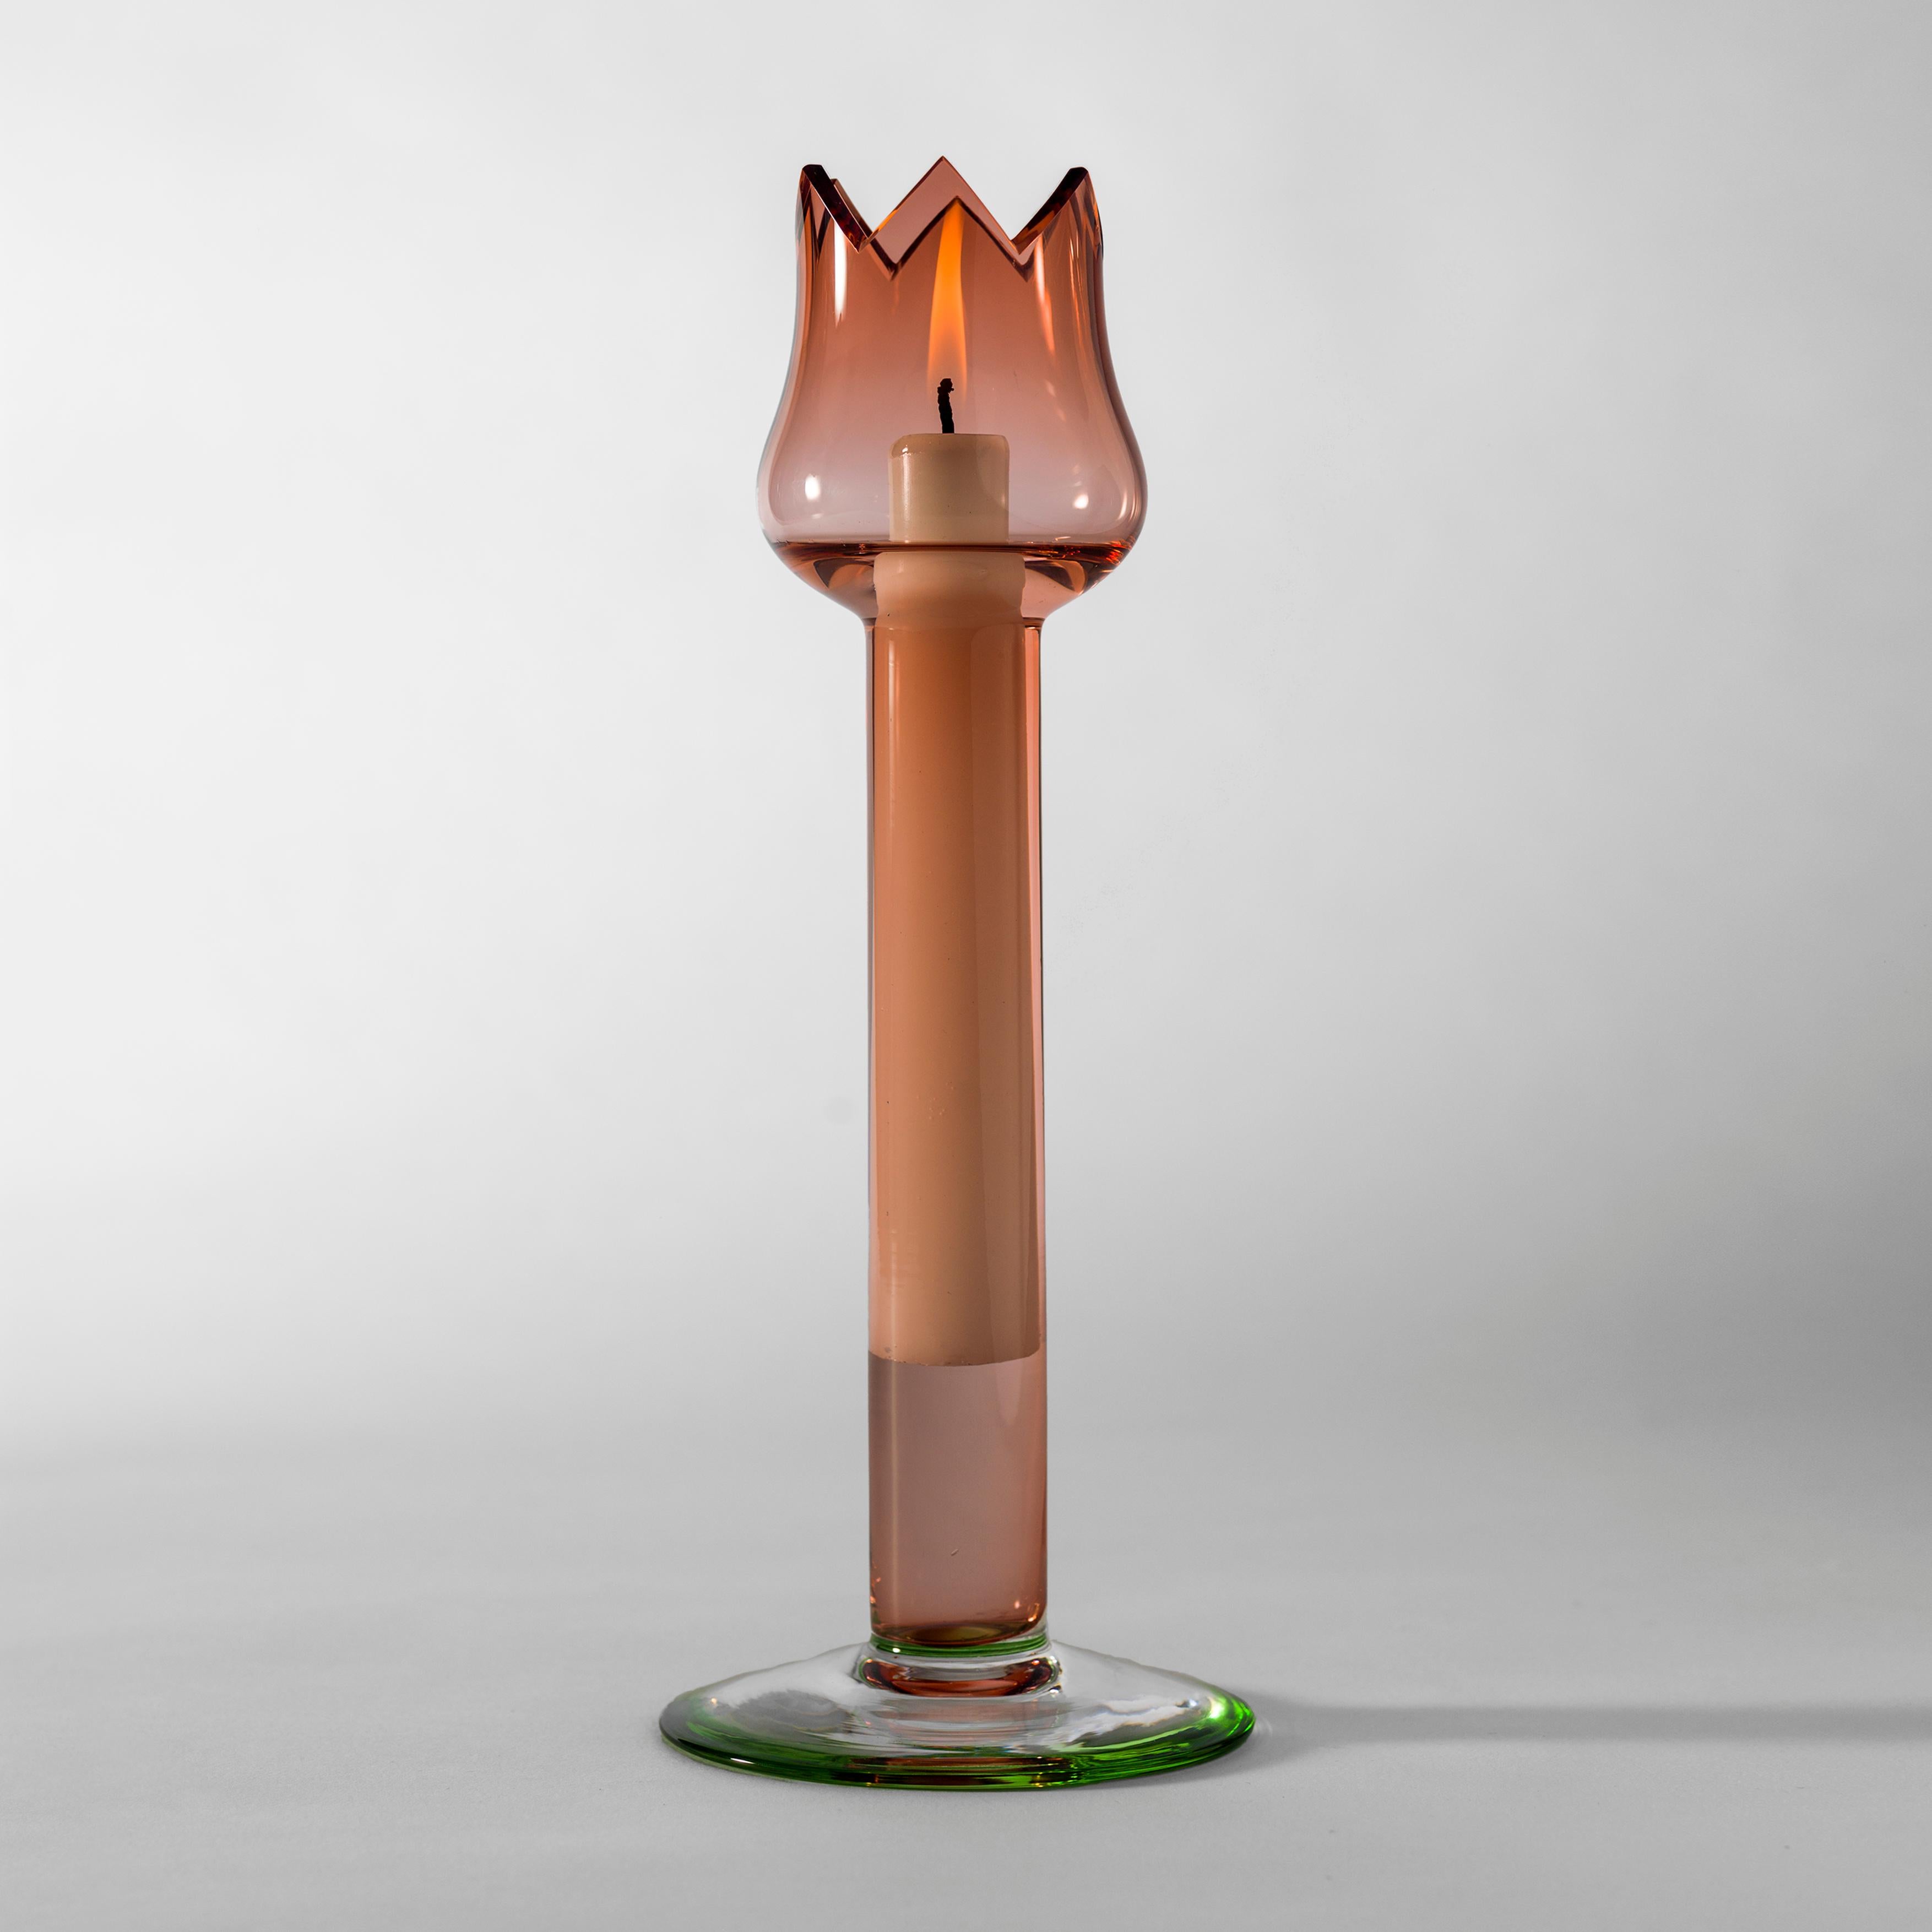 Red tulip candleholder by Oscar Tusquets.
Candleholder where the candle floats and the flame burns behind the red corolla.

Measure: 11 cm x 29 cm.